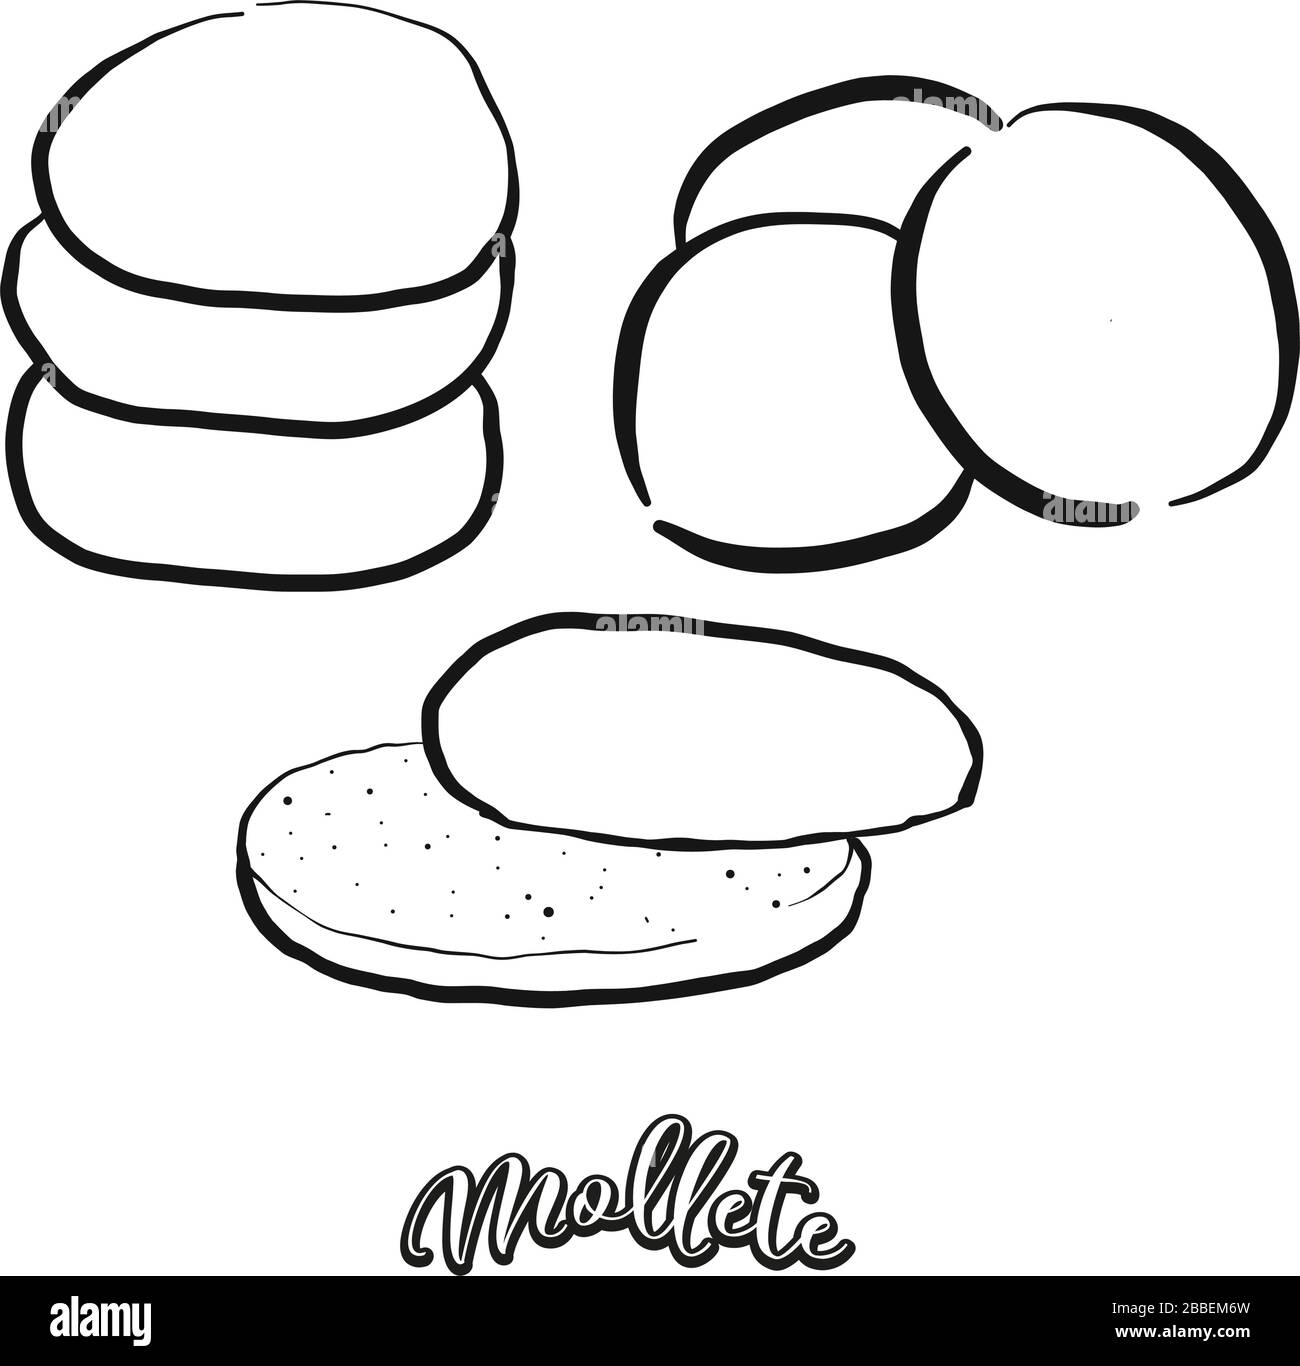 Mollete food sketch separated on white. Vector drawing of Flatbread, White, usually known in Andalusia, Spain. Food illustration series. Stock Vector